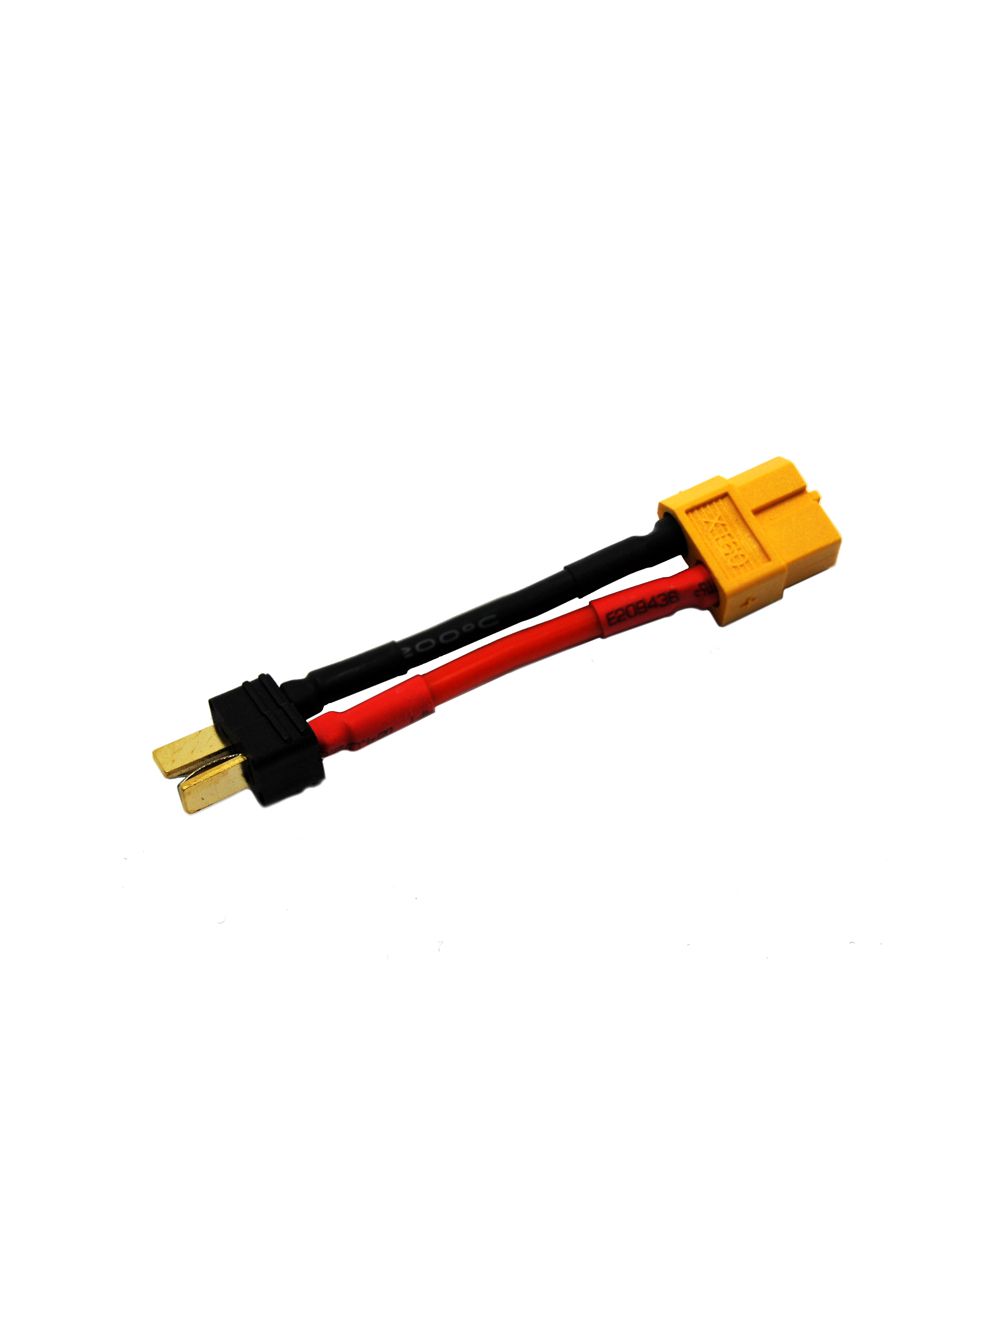 Overlander Female XT60 to Male Deans Conversion Lead 2654